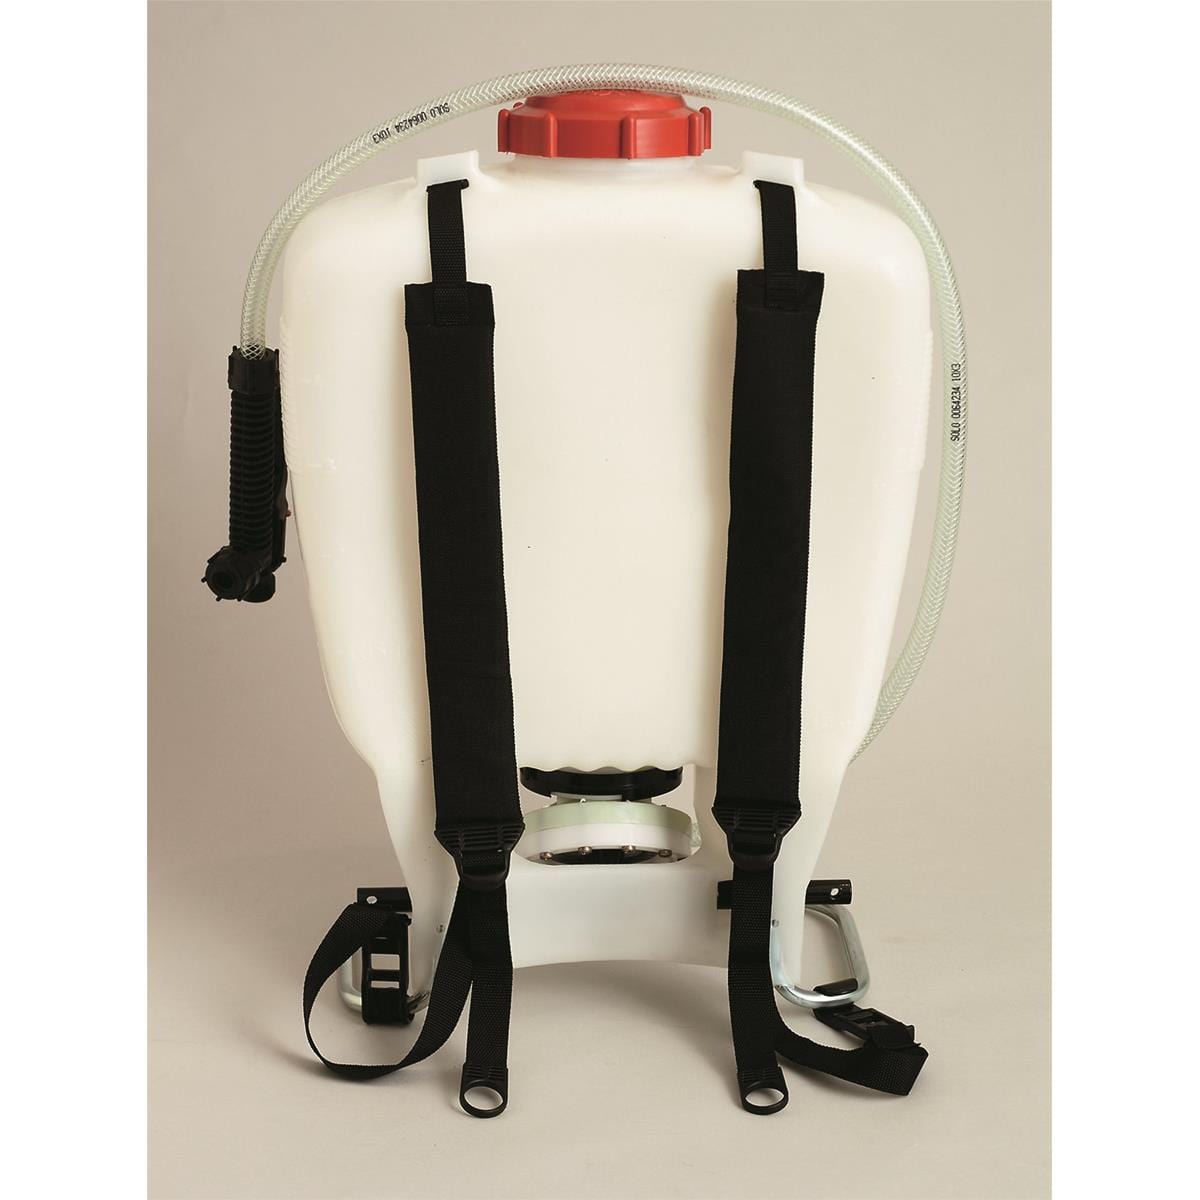 Solo 5 Gallon Standard Backpack Sprayer with Diaphragm Pump